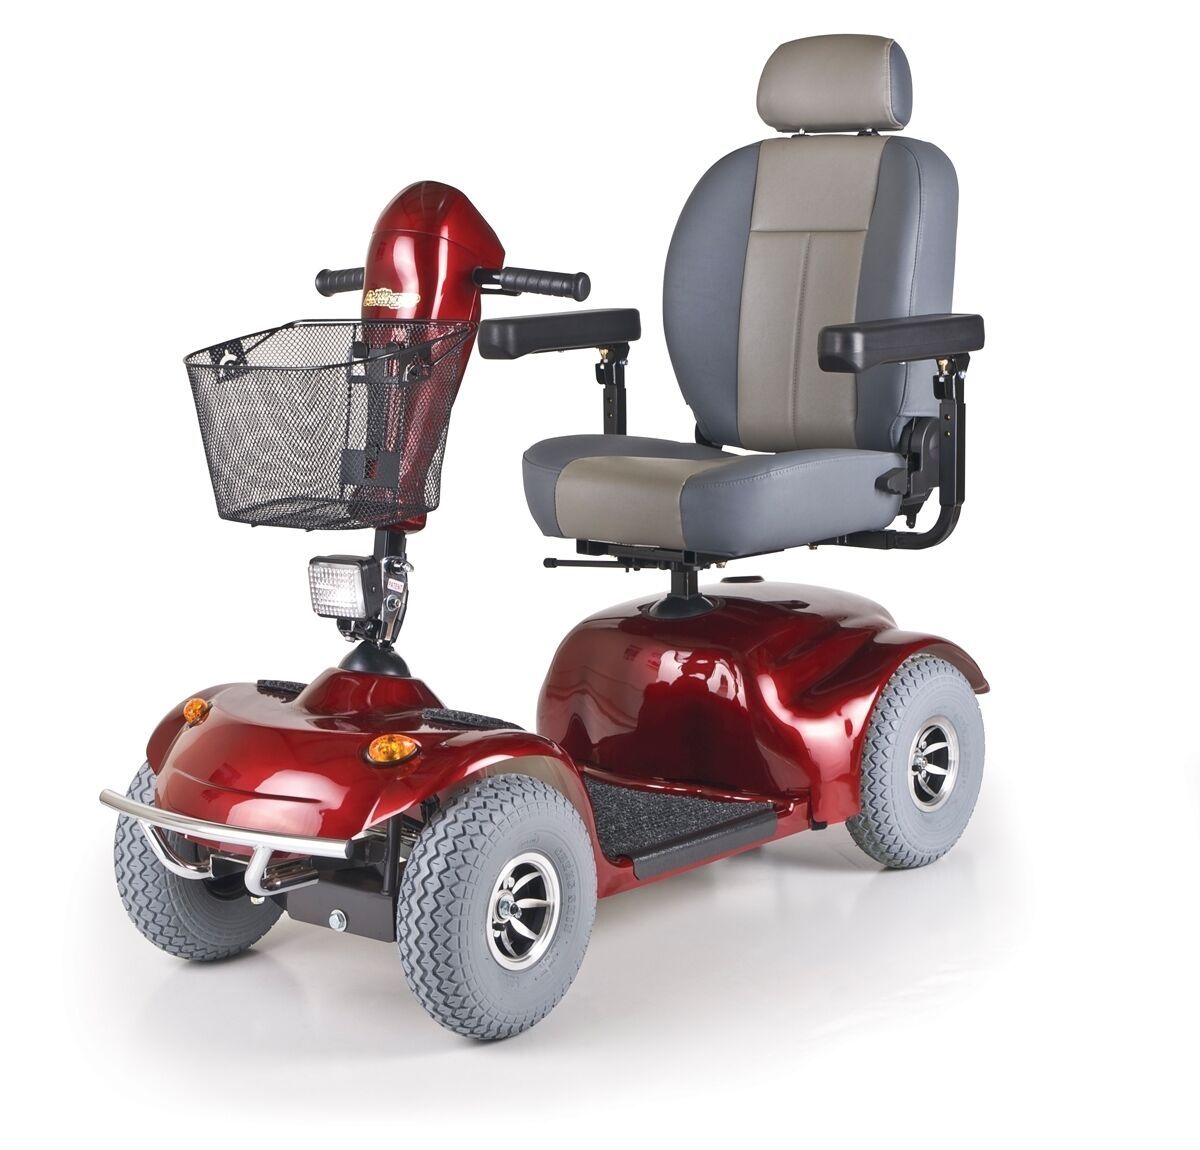 Image of Golden Avenger Heavy Duty 4-Wheel Scooter product